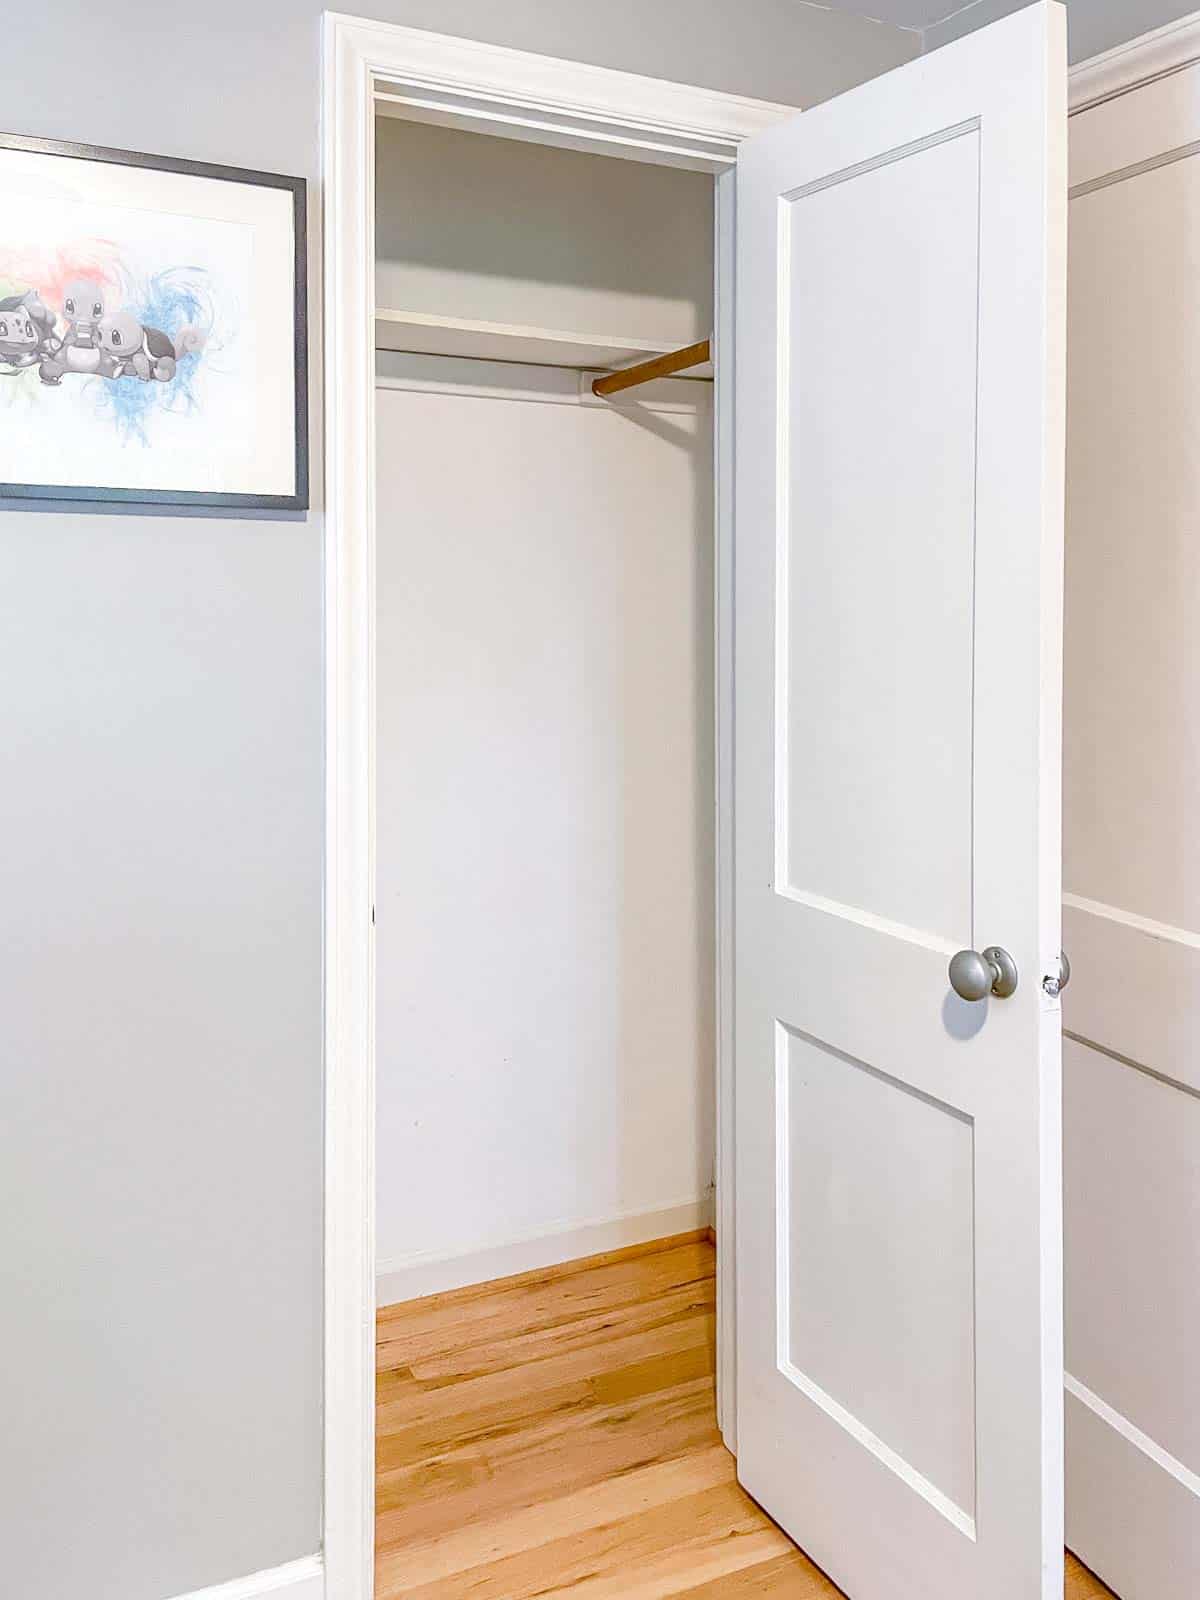 empty closet with deeper right side with clothes rod extending front to back